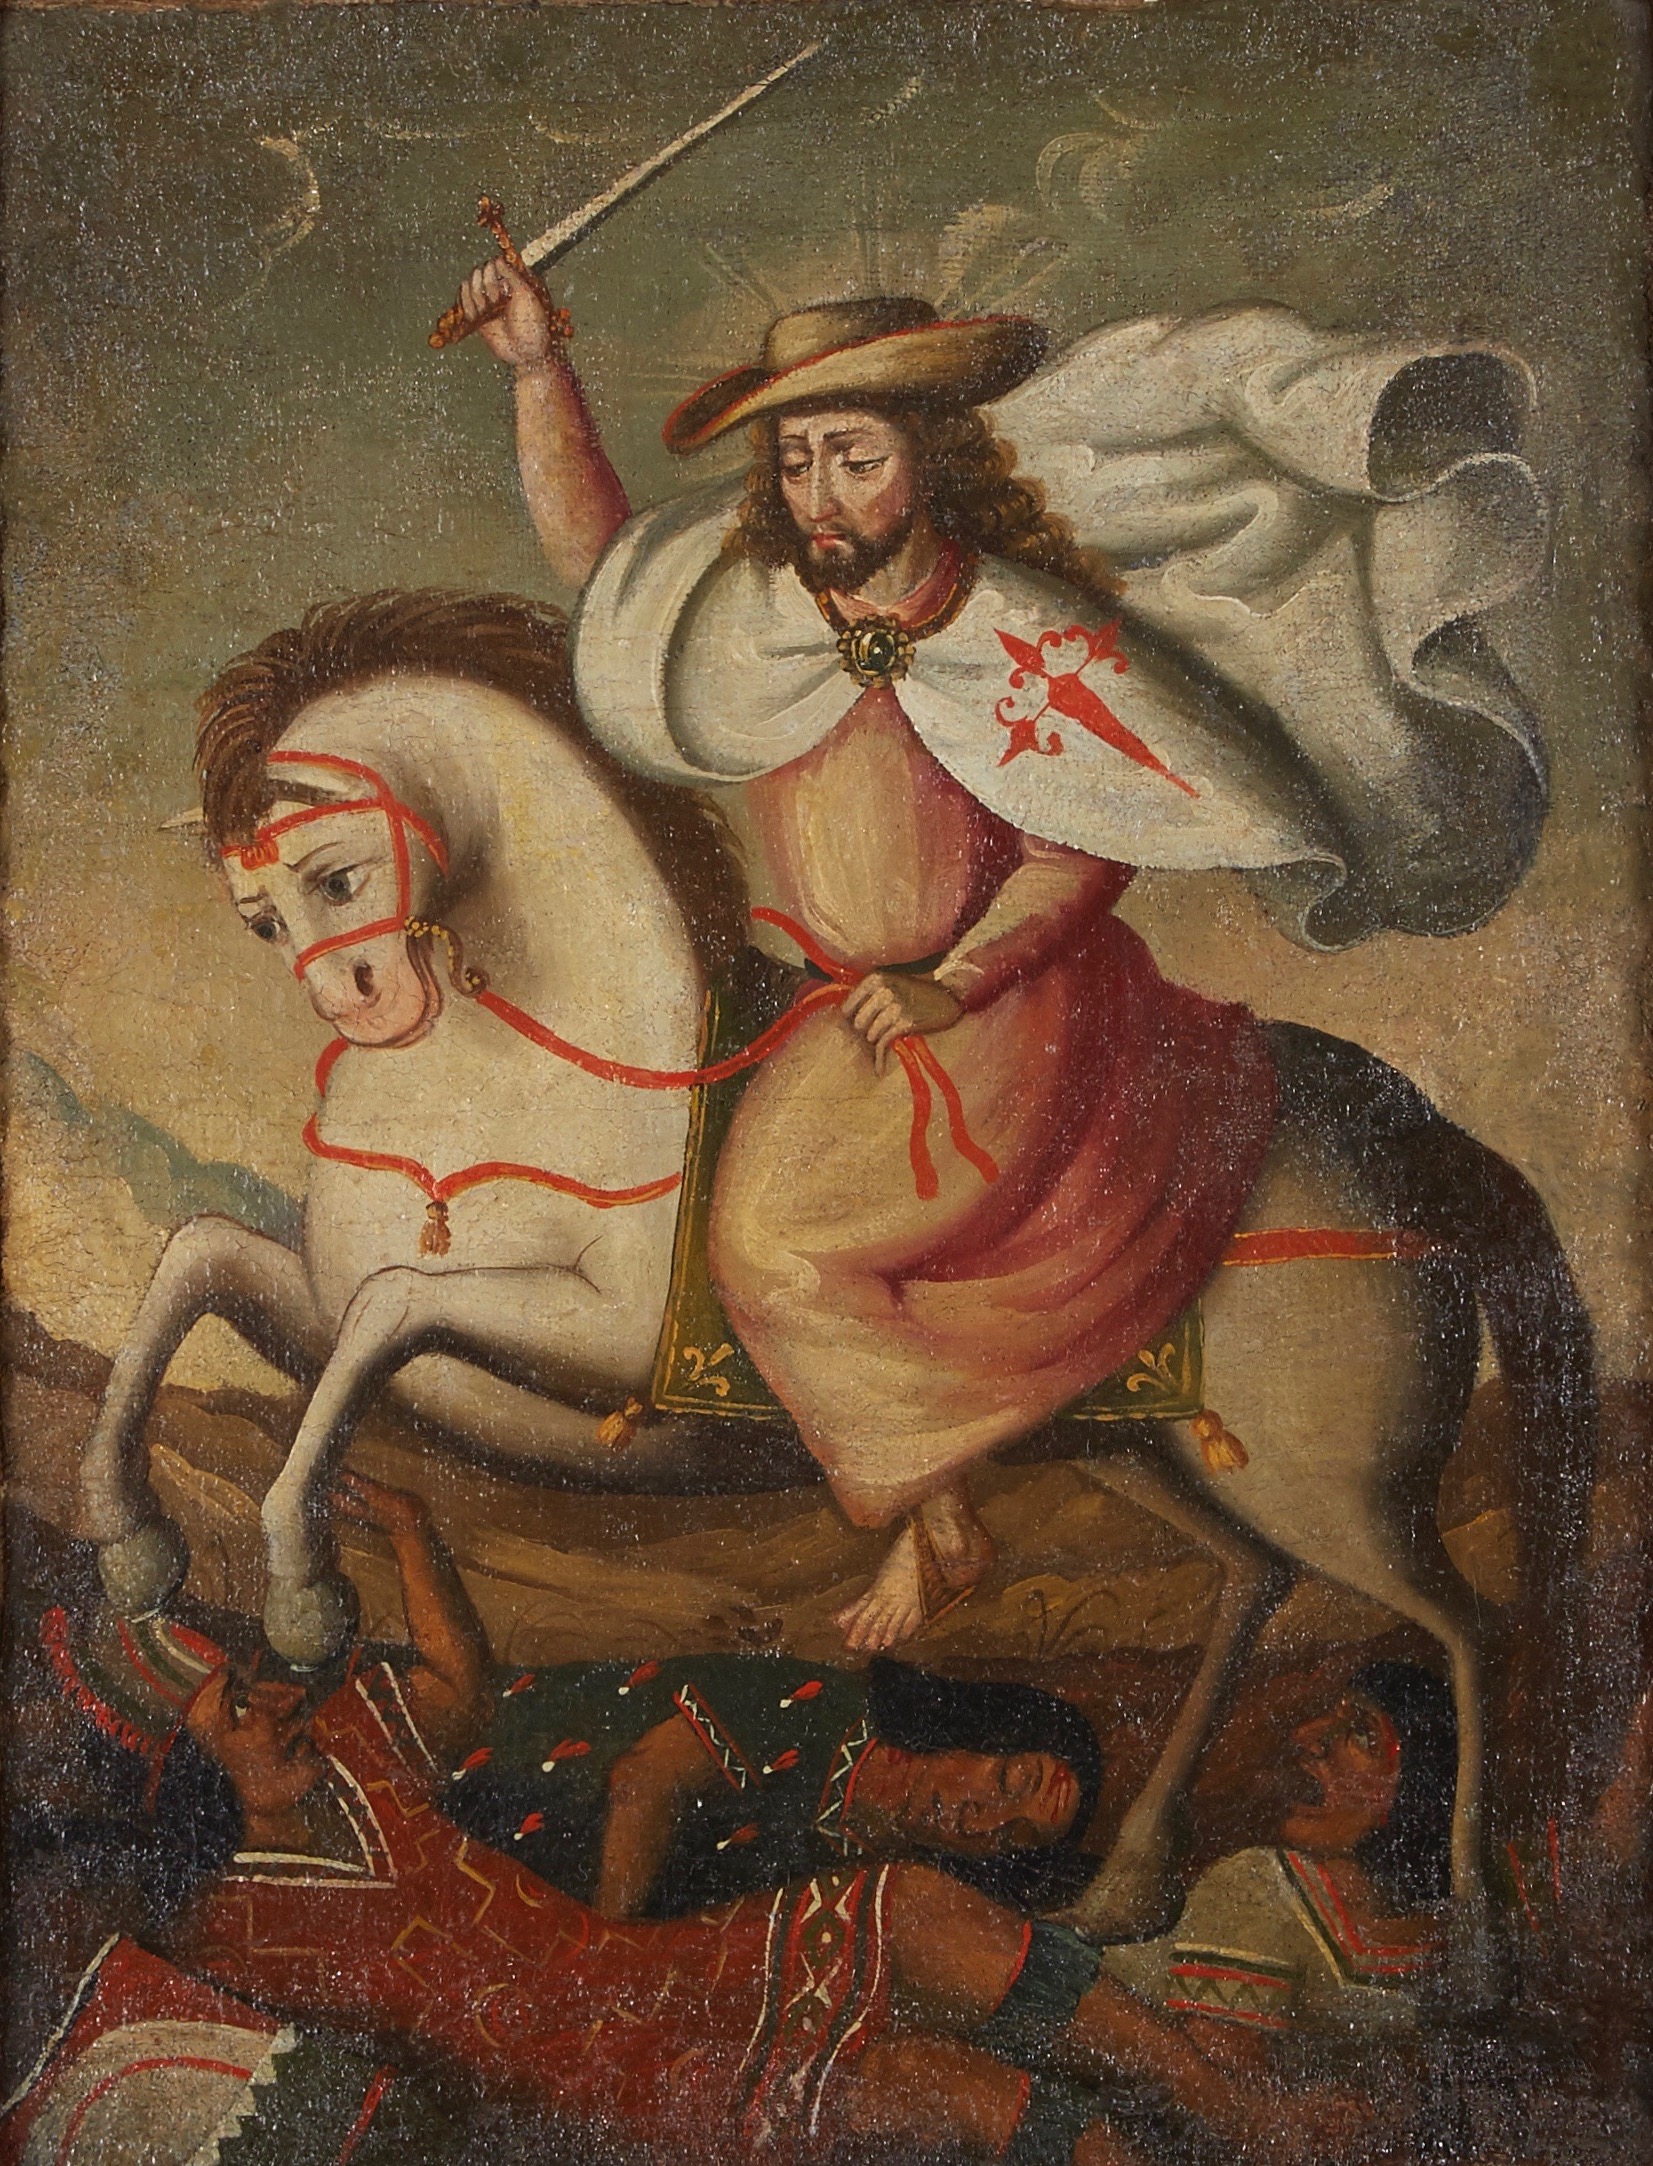 A painting of a bearded man on a white horse wielding a sword.